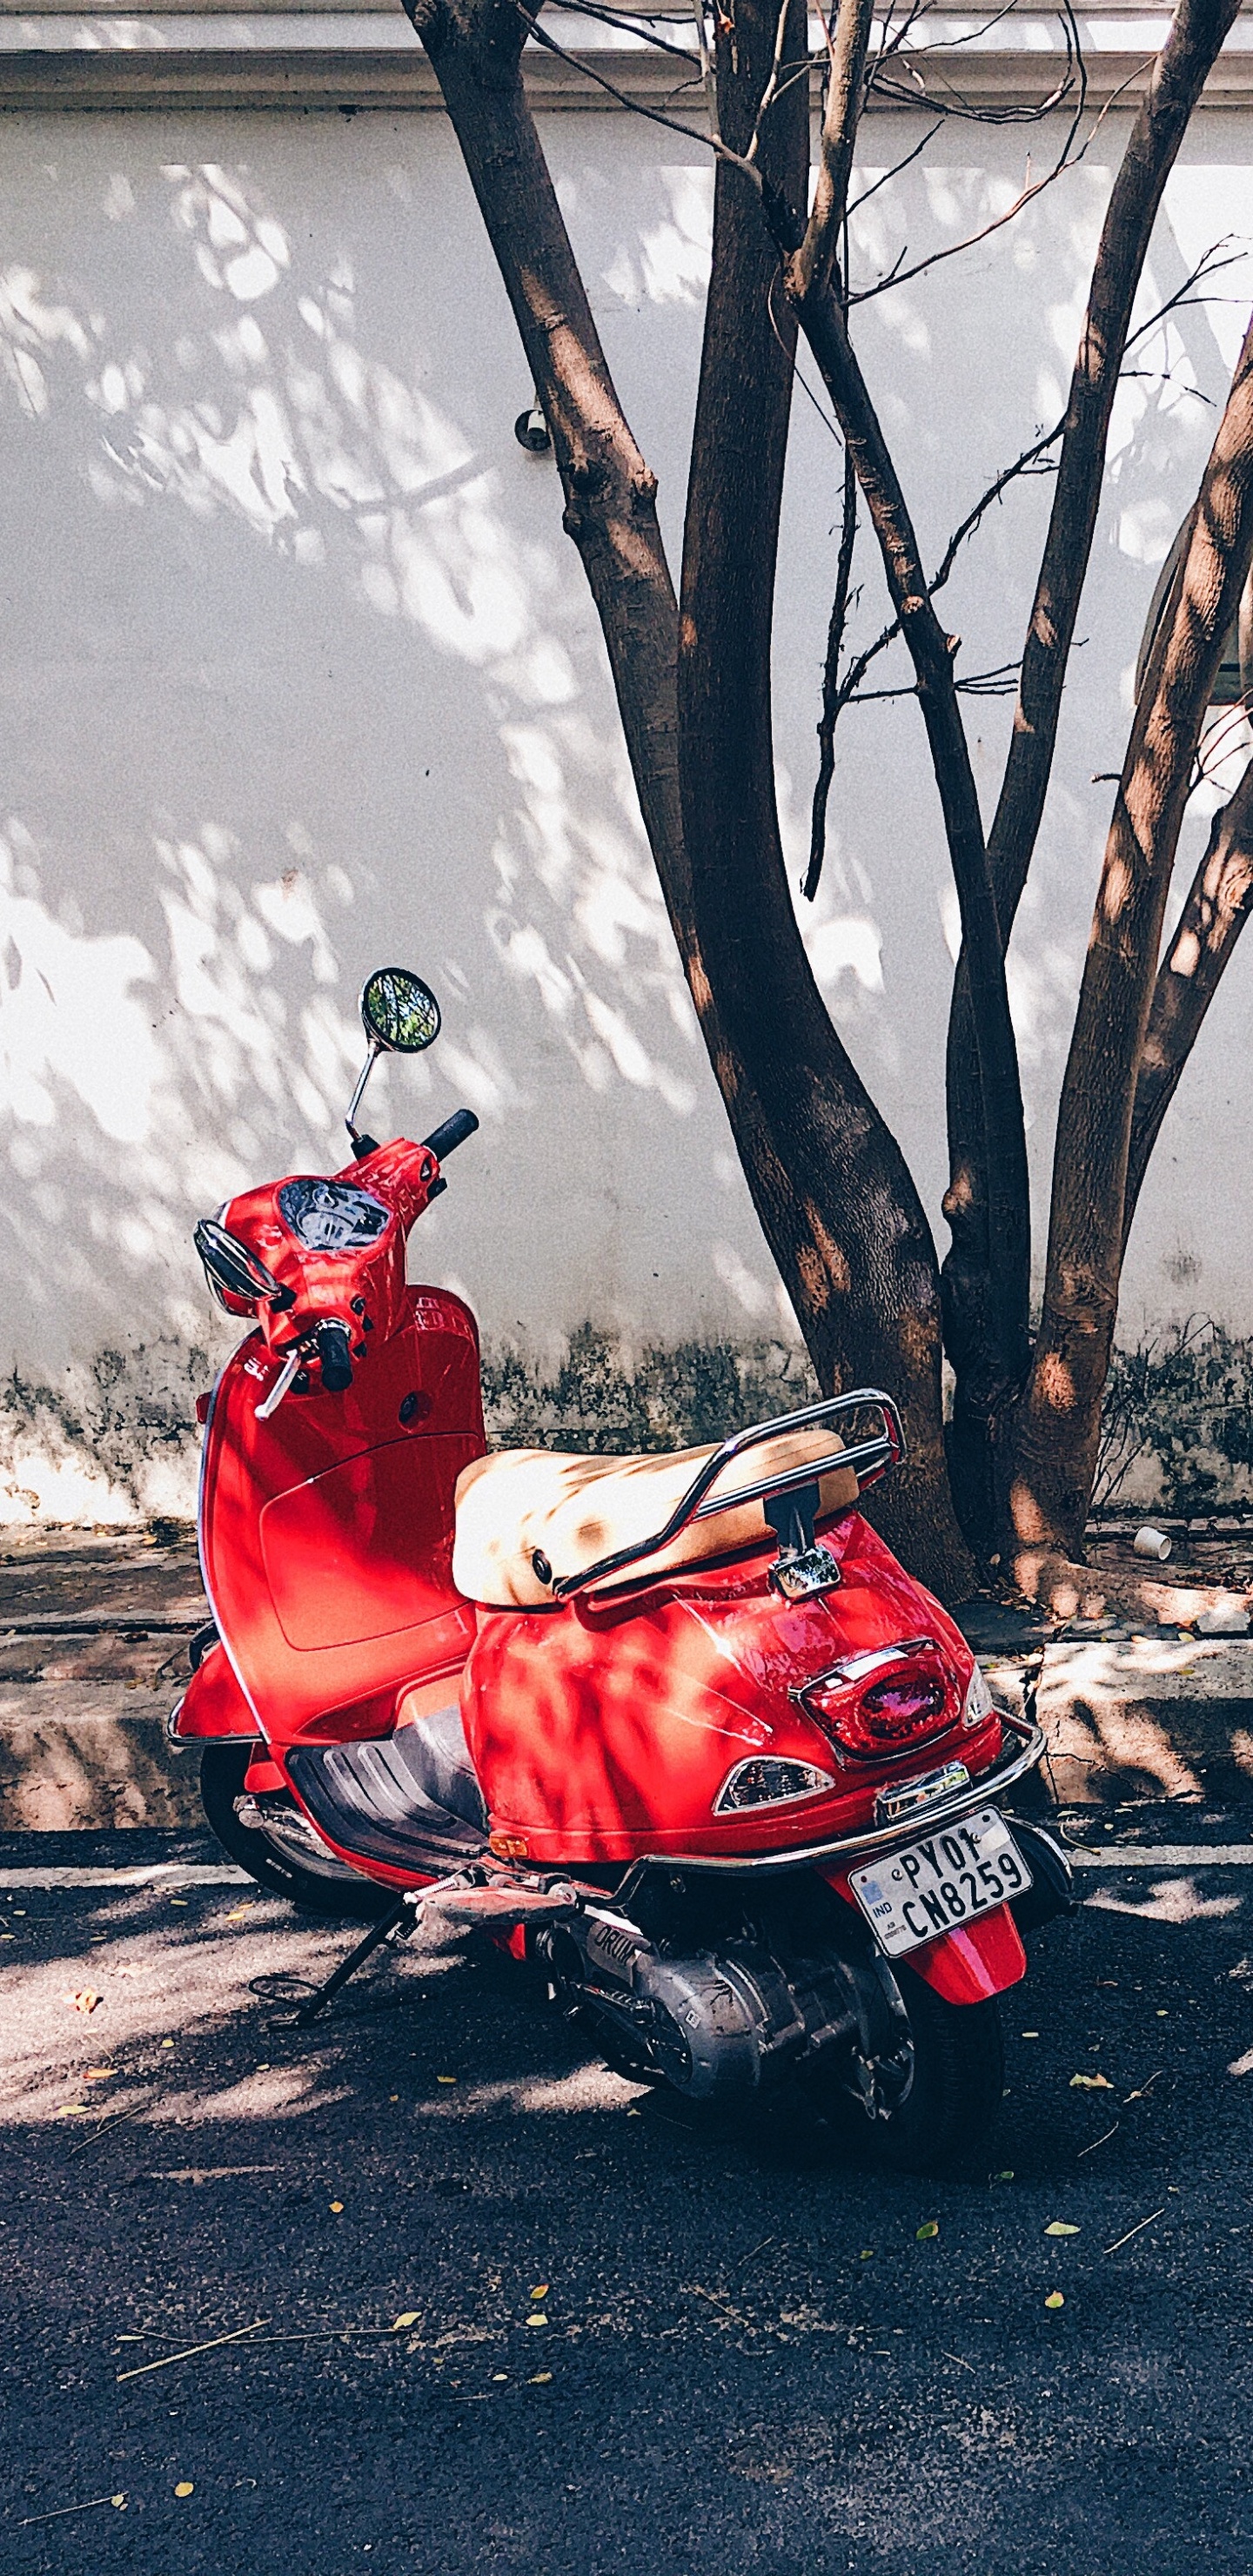 Man in Red Jacket Riding Red Motor Scooter on Road During Daytime. Wallpaper in 1440x2960 Resolution